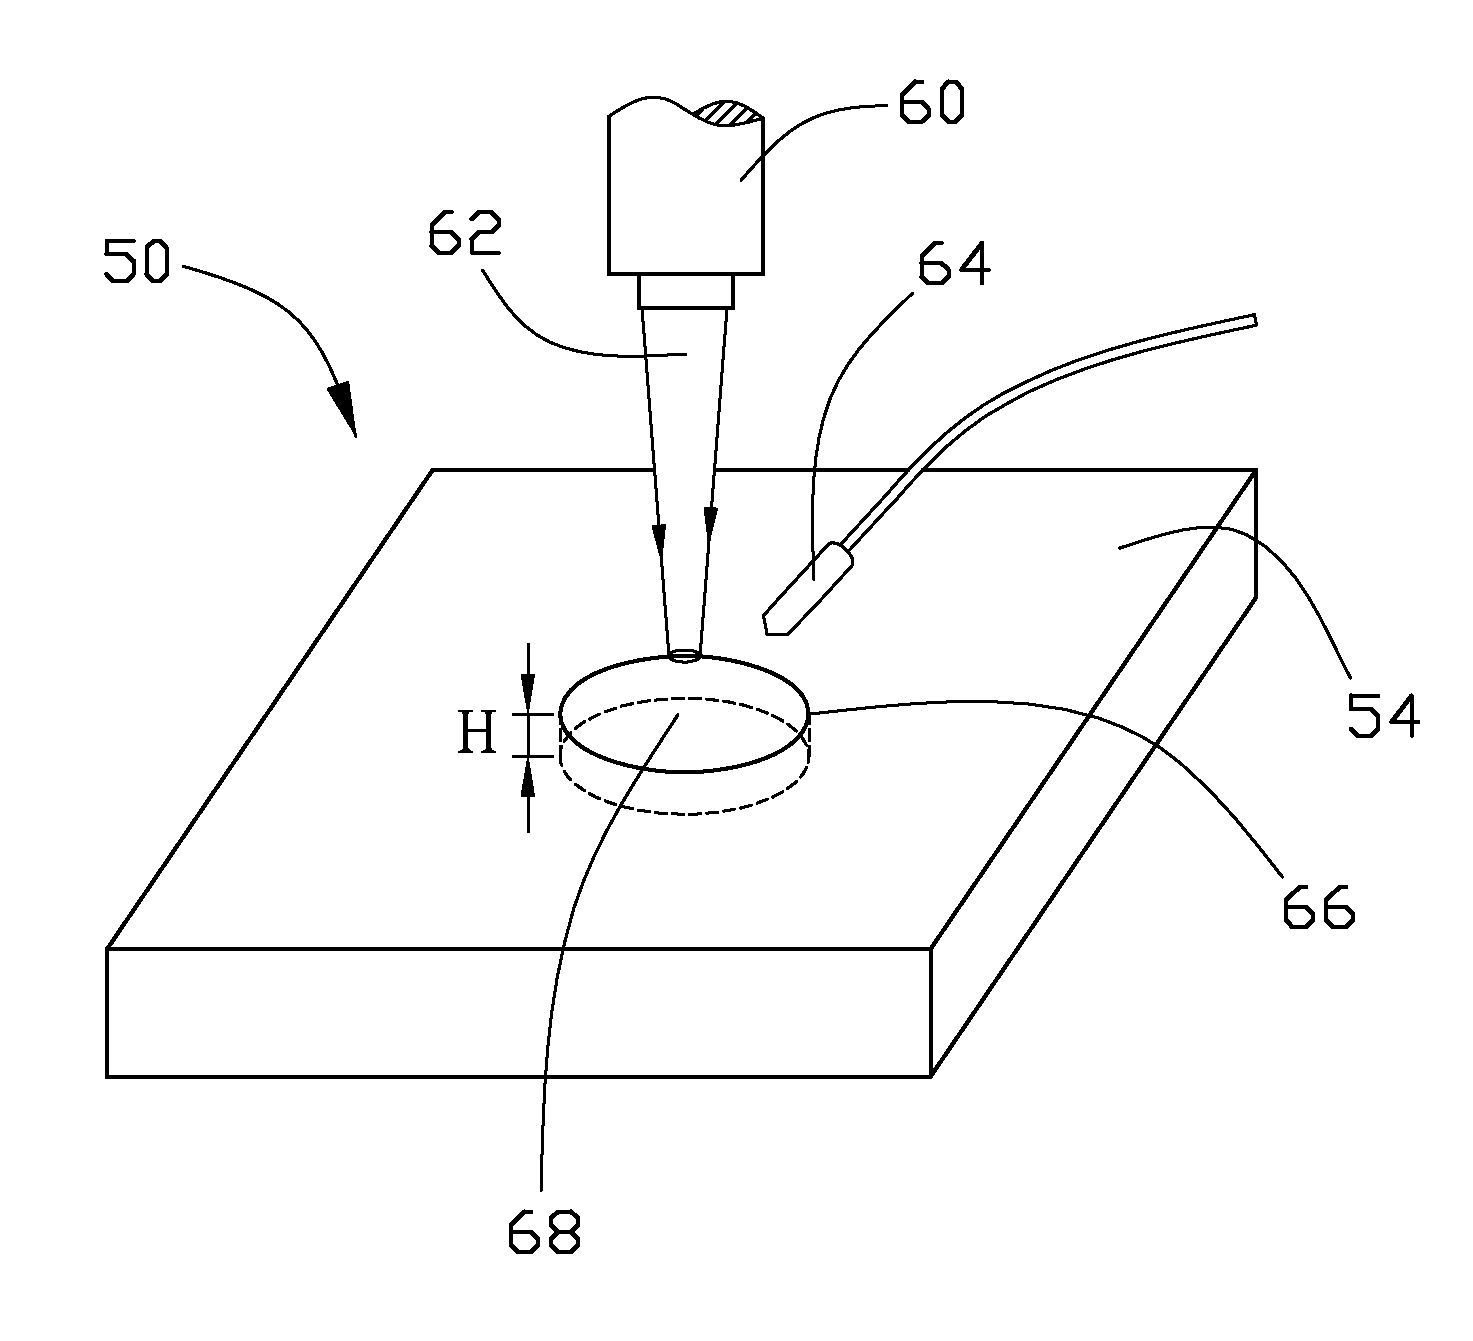 Brittle non-metallic workpiece with through hole and method for making same